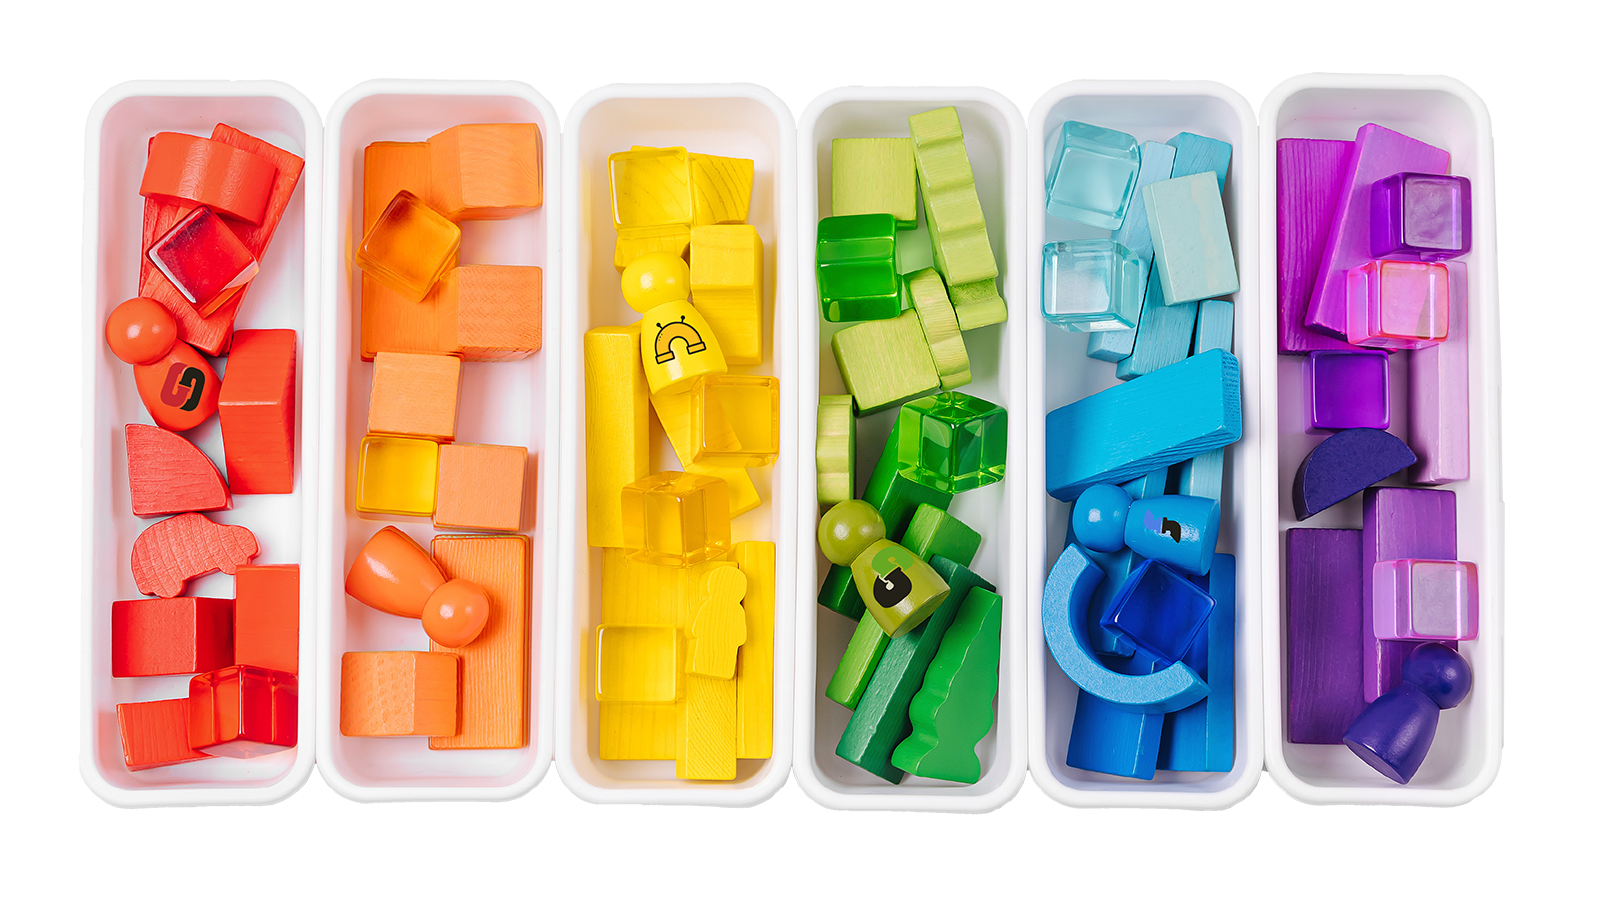 Sorting blocks into bins by color.